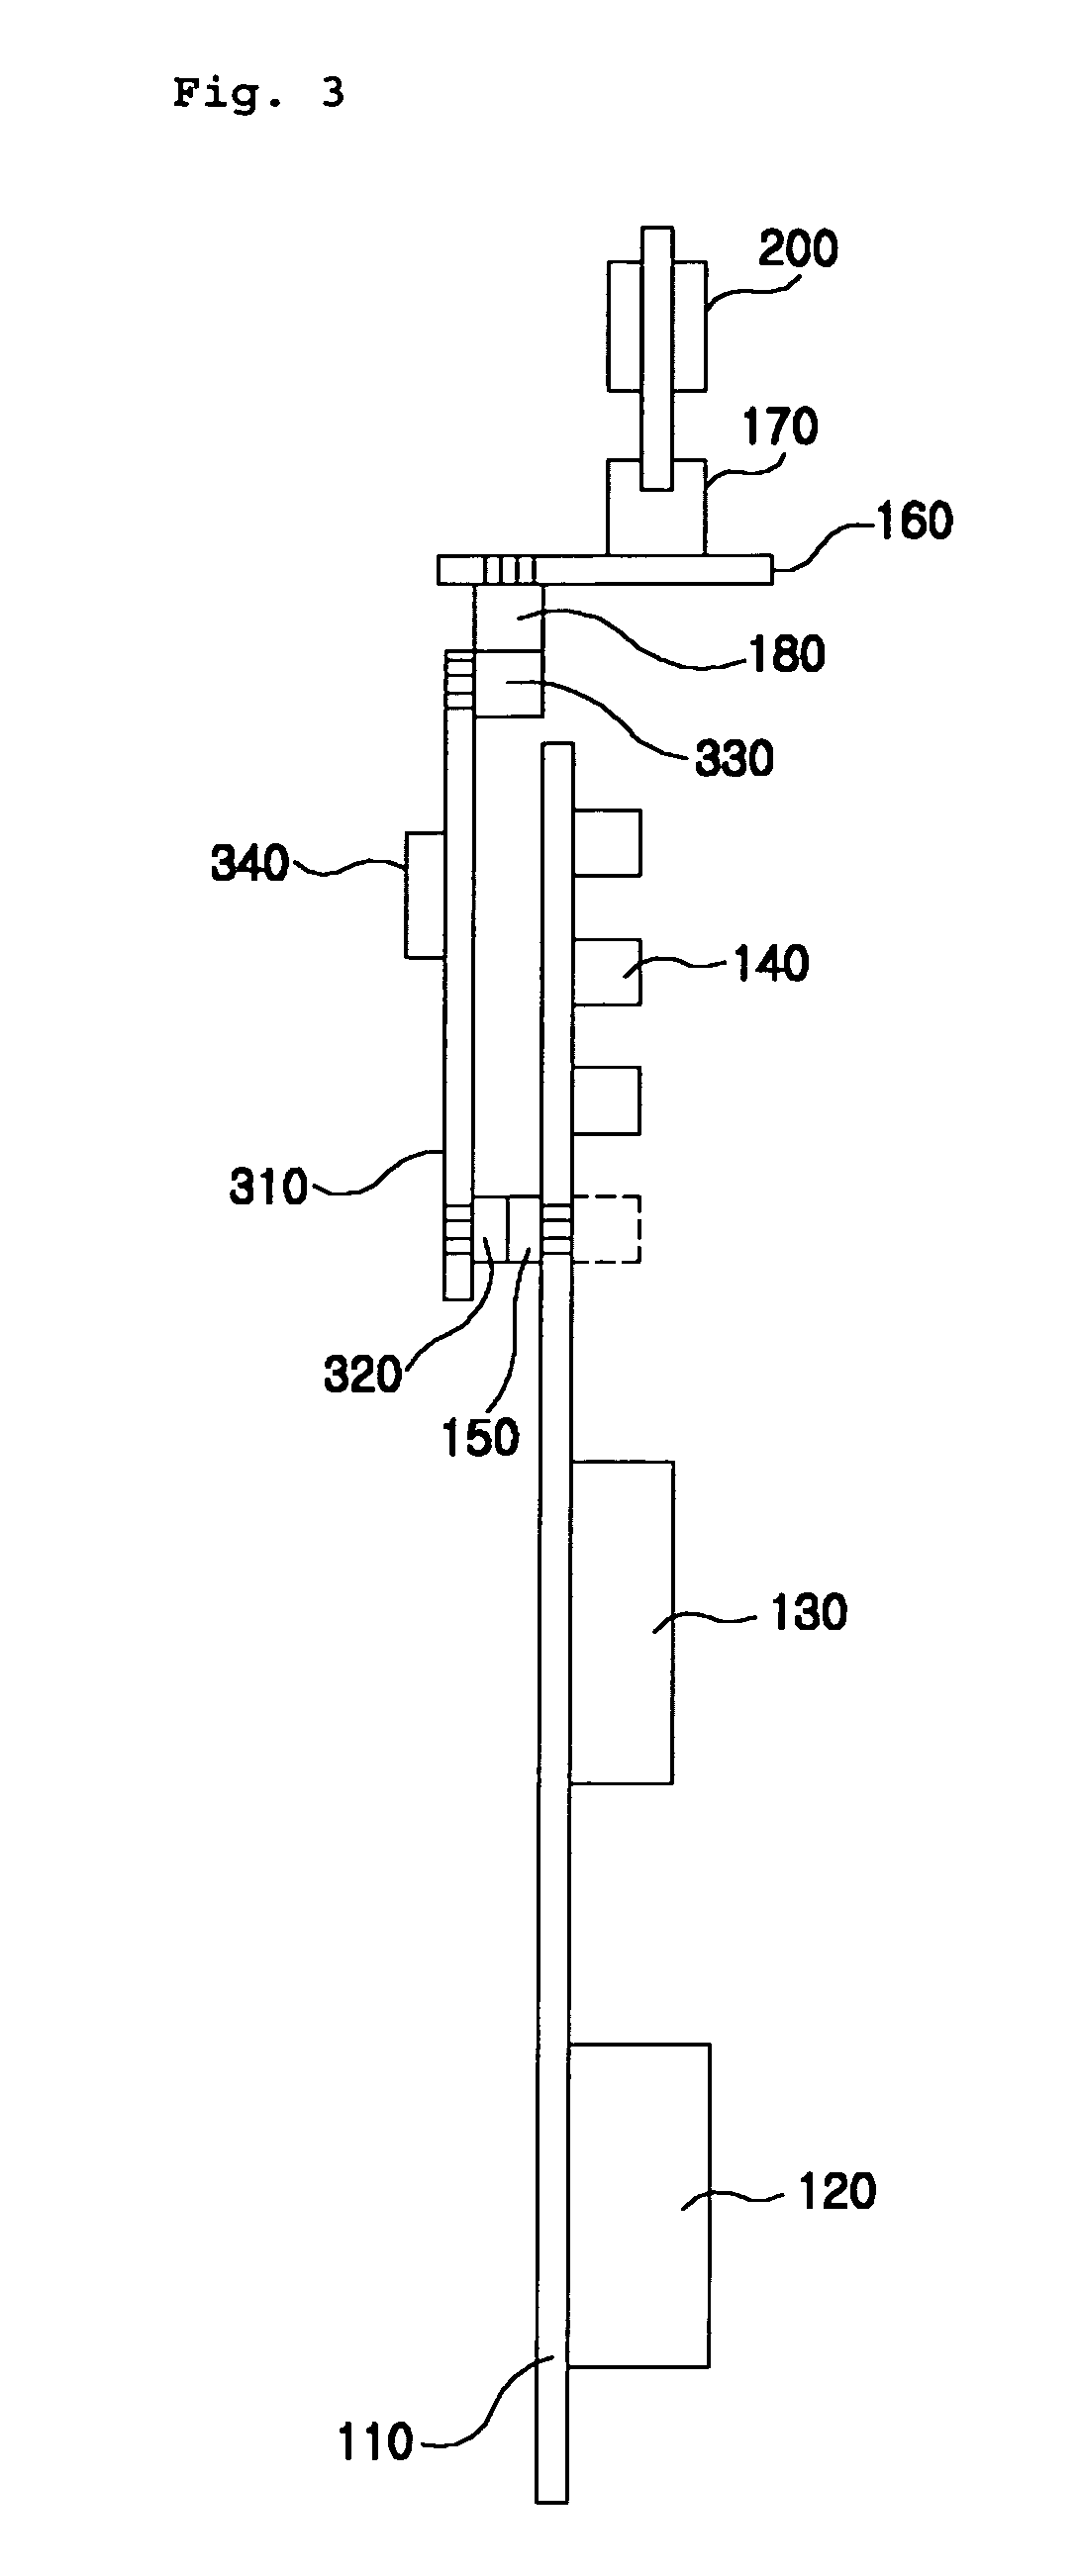 Memory application tester having vertically-mounted motherboard